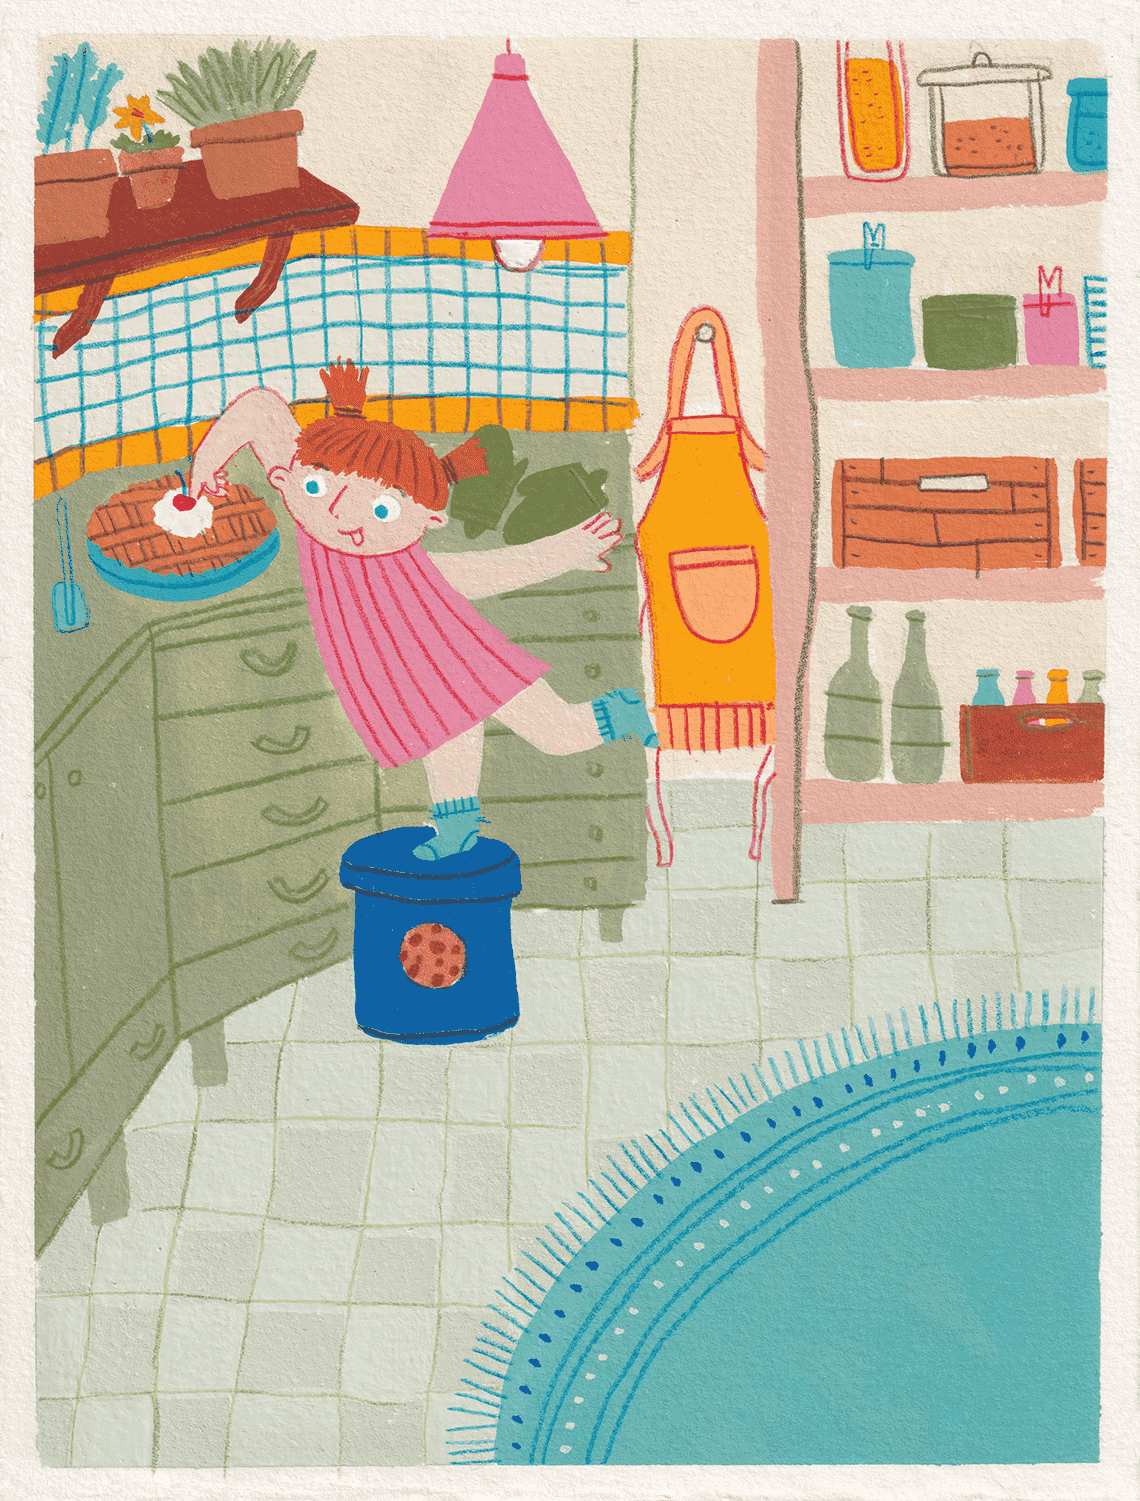 Gouache illustration of a girl sticking her finger in the cream sprayed on top of a pie, which is laying over a kitchen top.